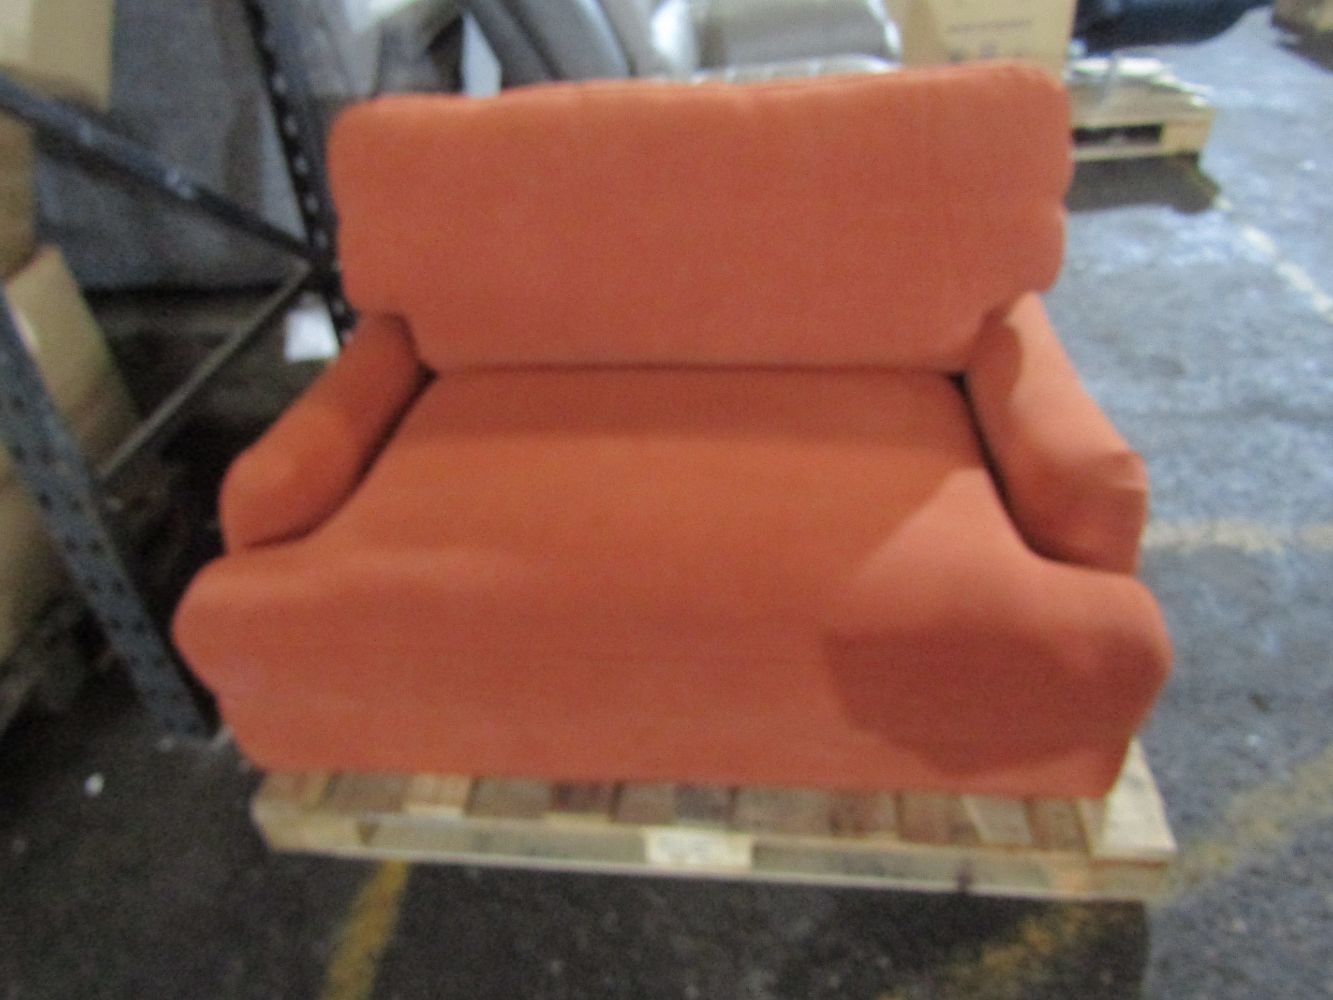 NEW LOTS ADDED ON THURSDAY! - Sofas, Chairs & Pouffes from Stressless, SCS and more